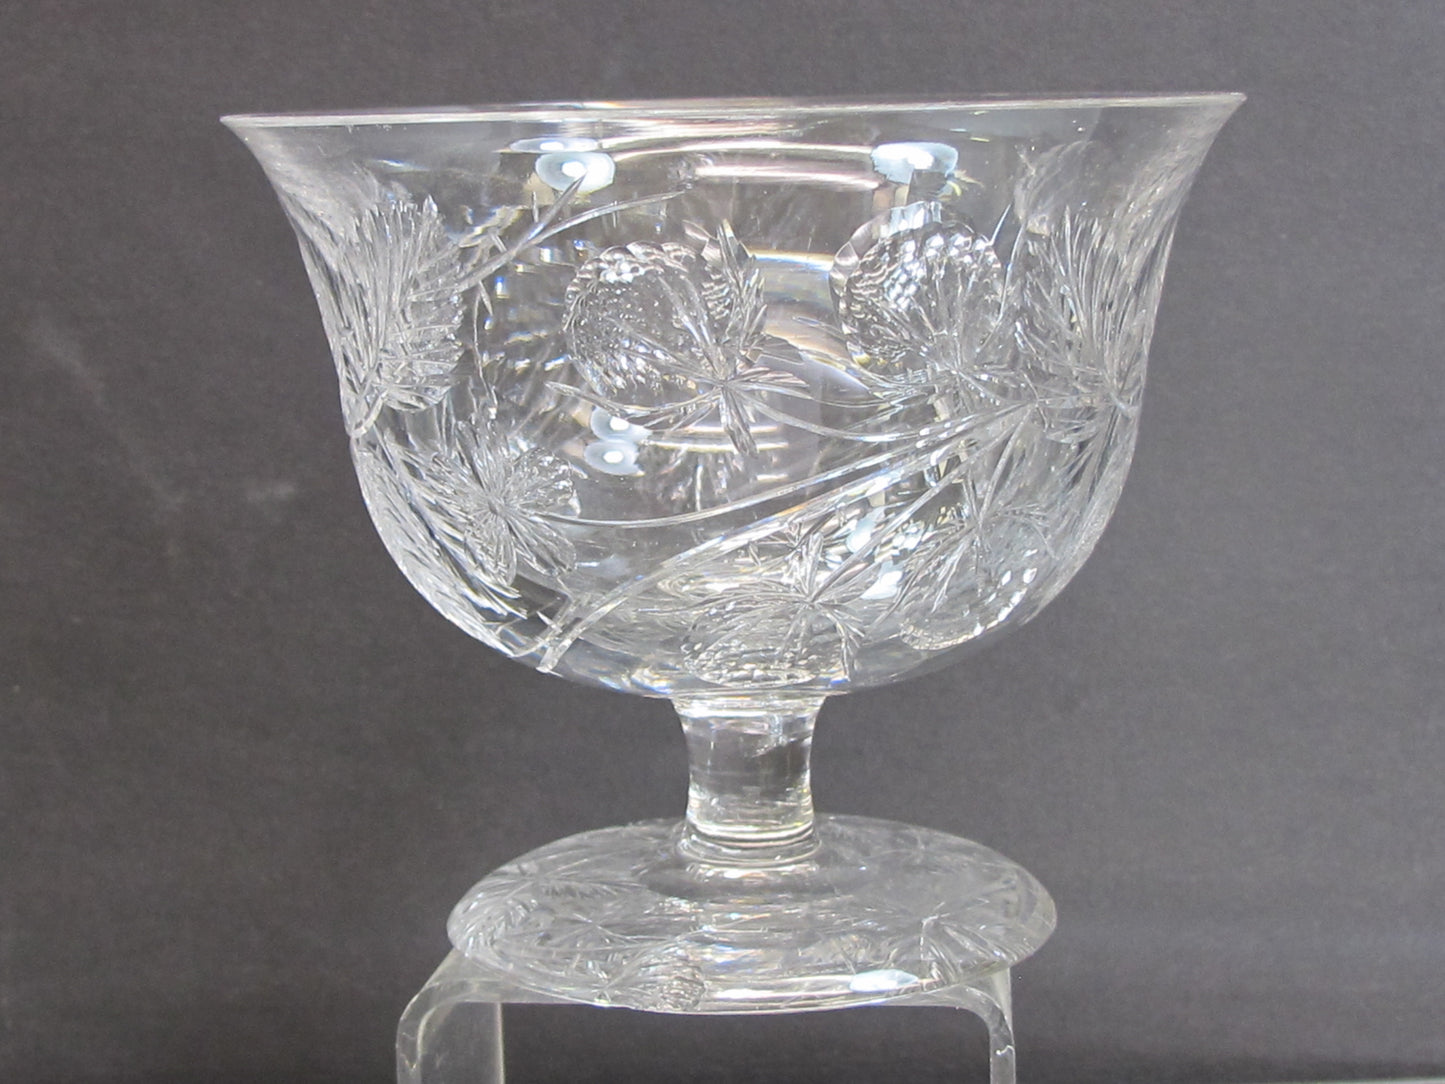 Cut Glass footed small bowl Antique Floral WHEEL CUT Strawberry